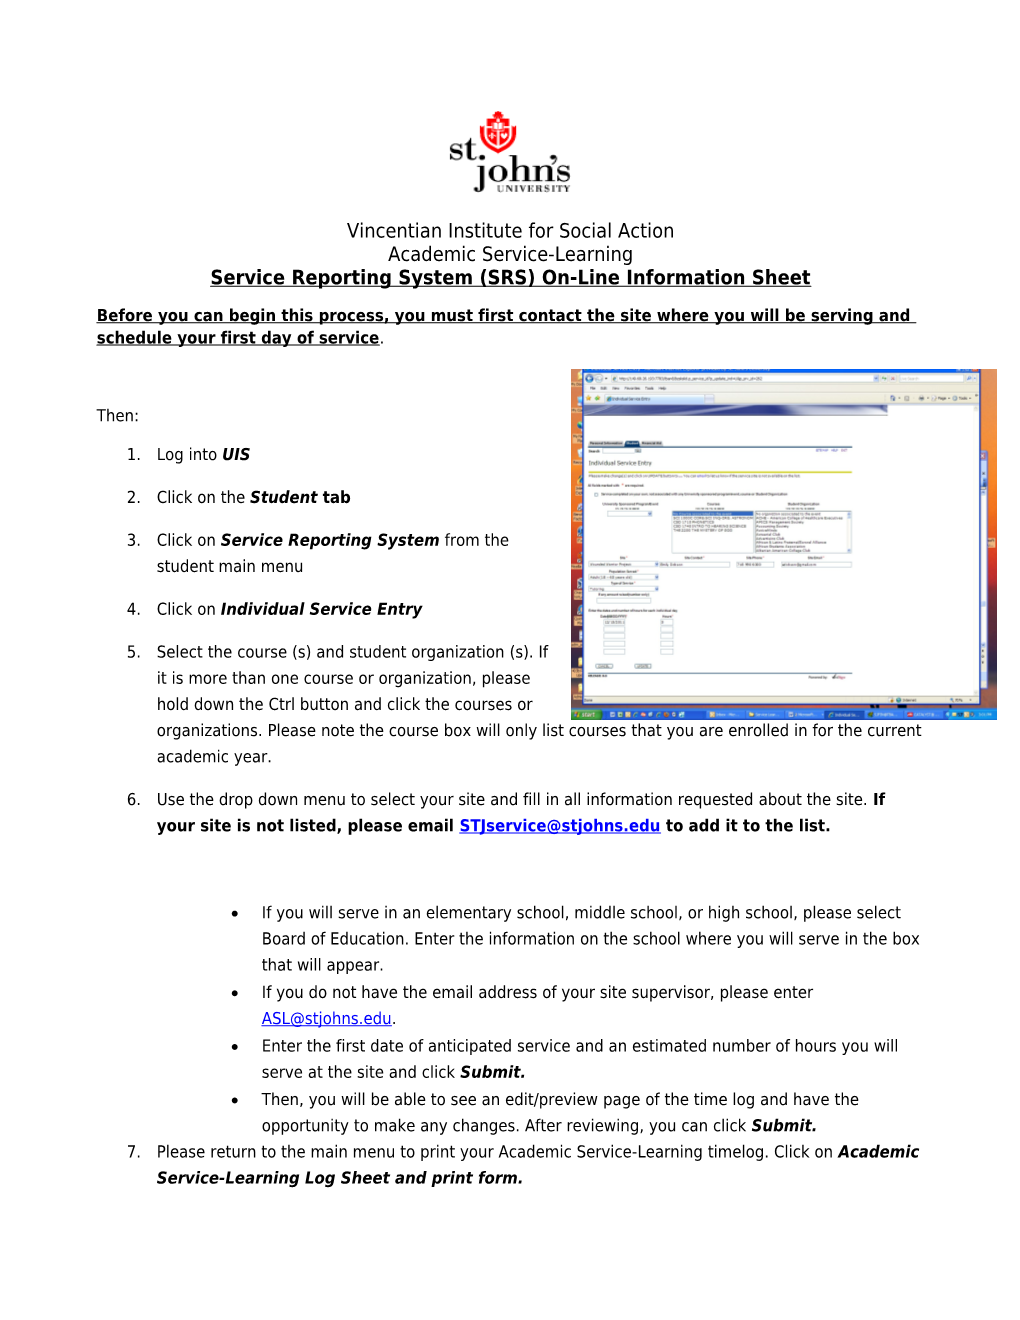 Service Reporting System (SRS) On-Line Information Sheet